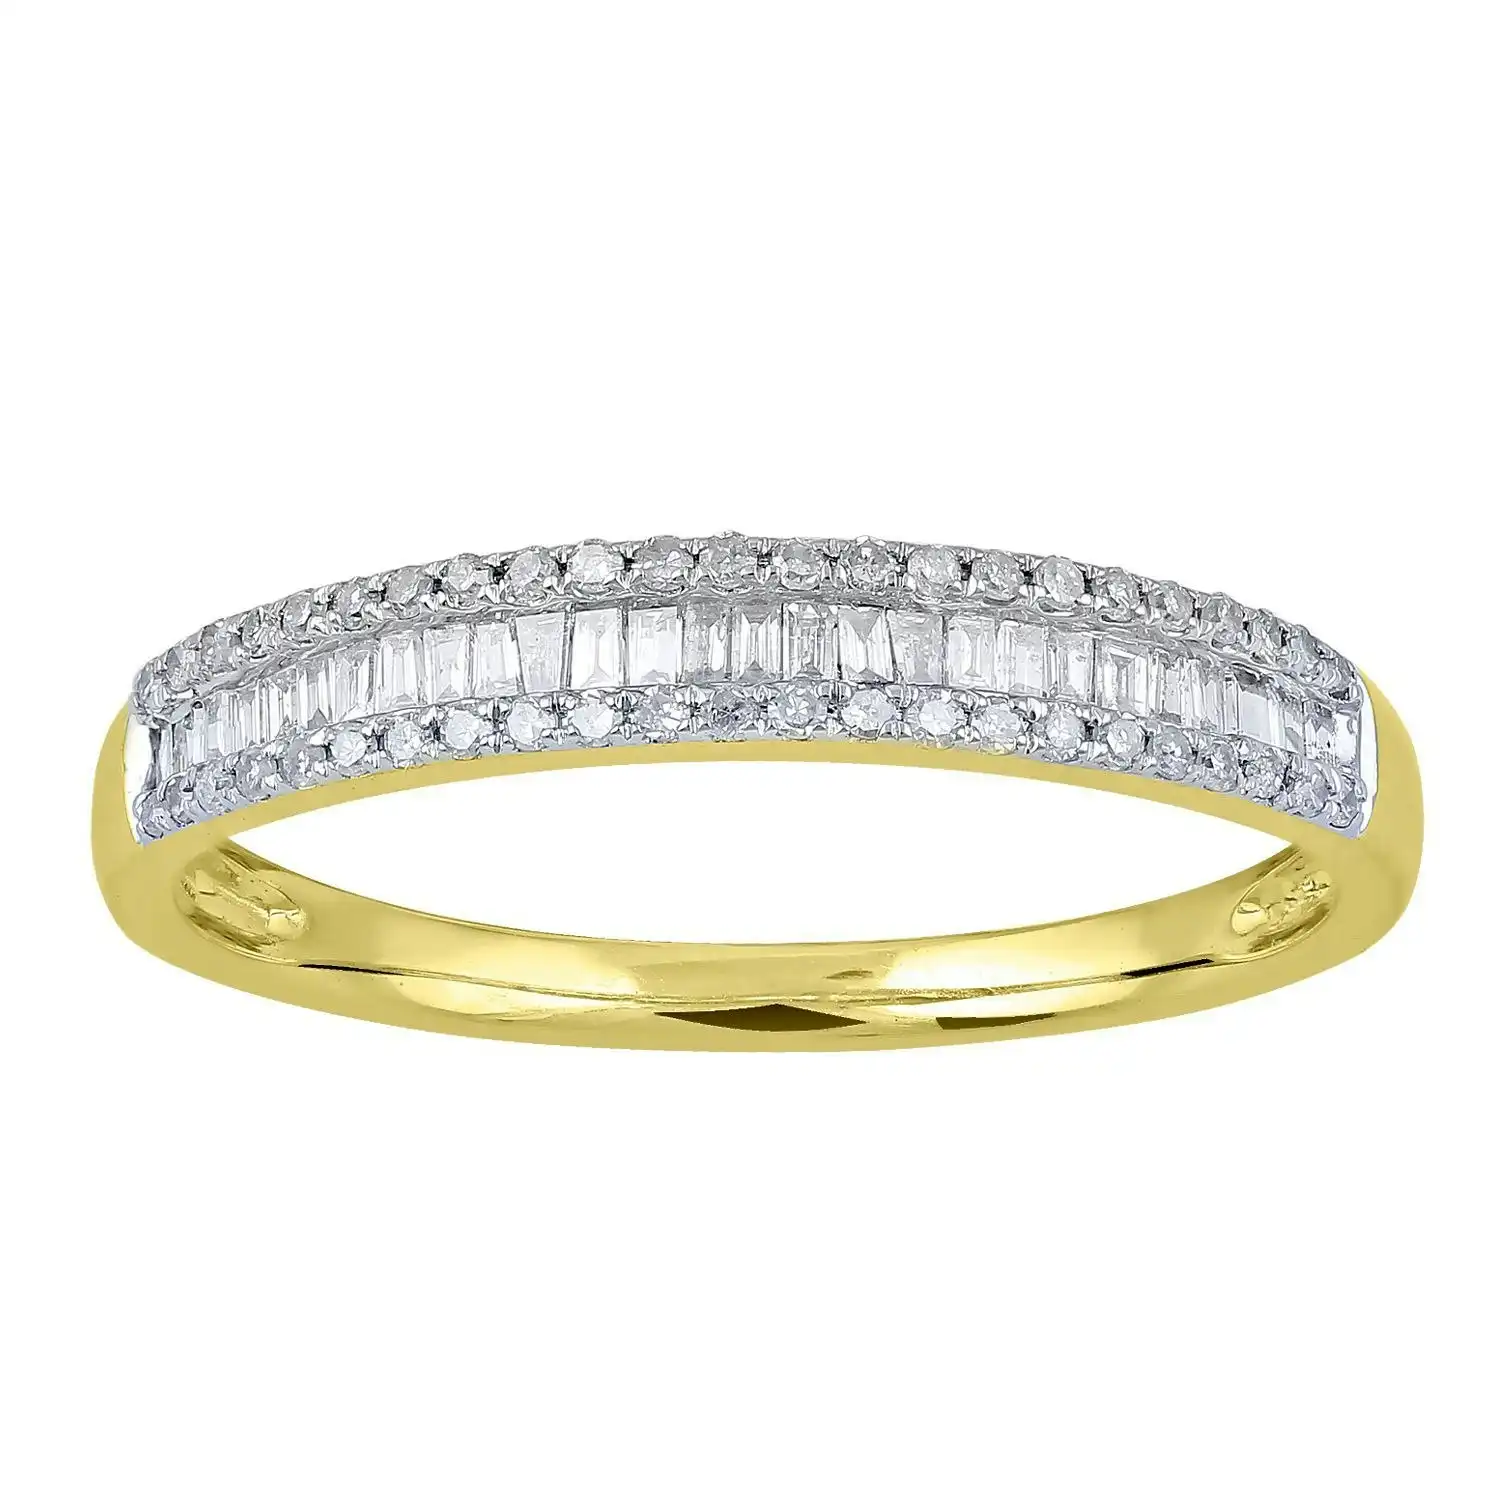 Baguette Channel Ring with 1/4ct of Diamonds in 9ct Yellow Gold